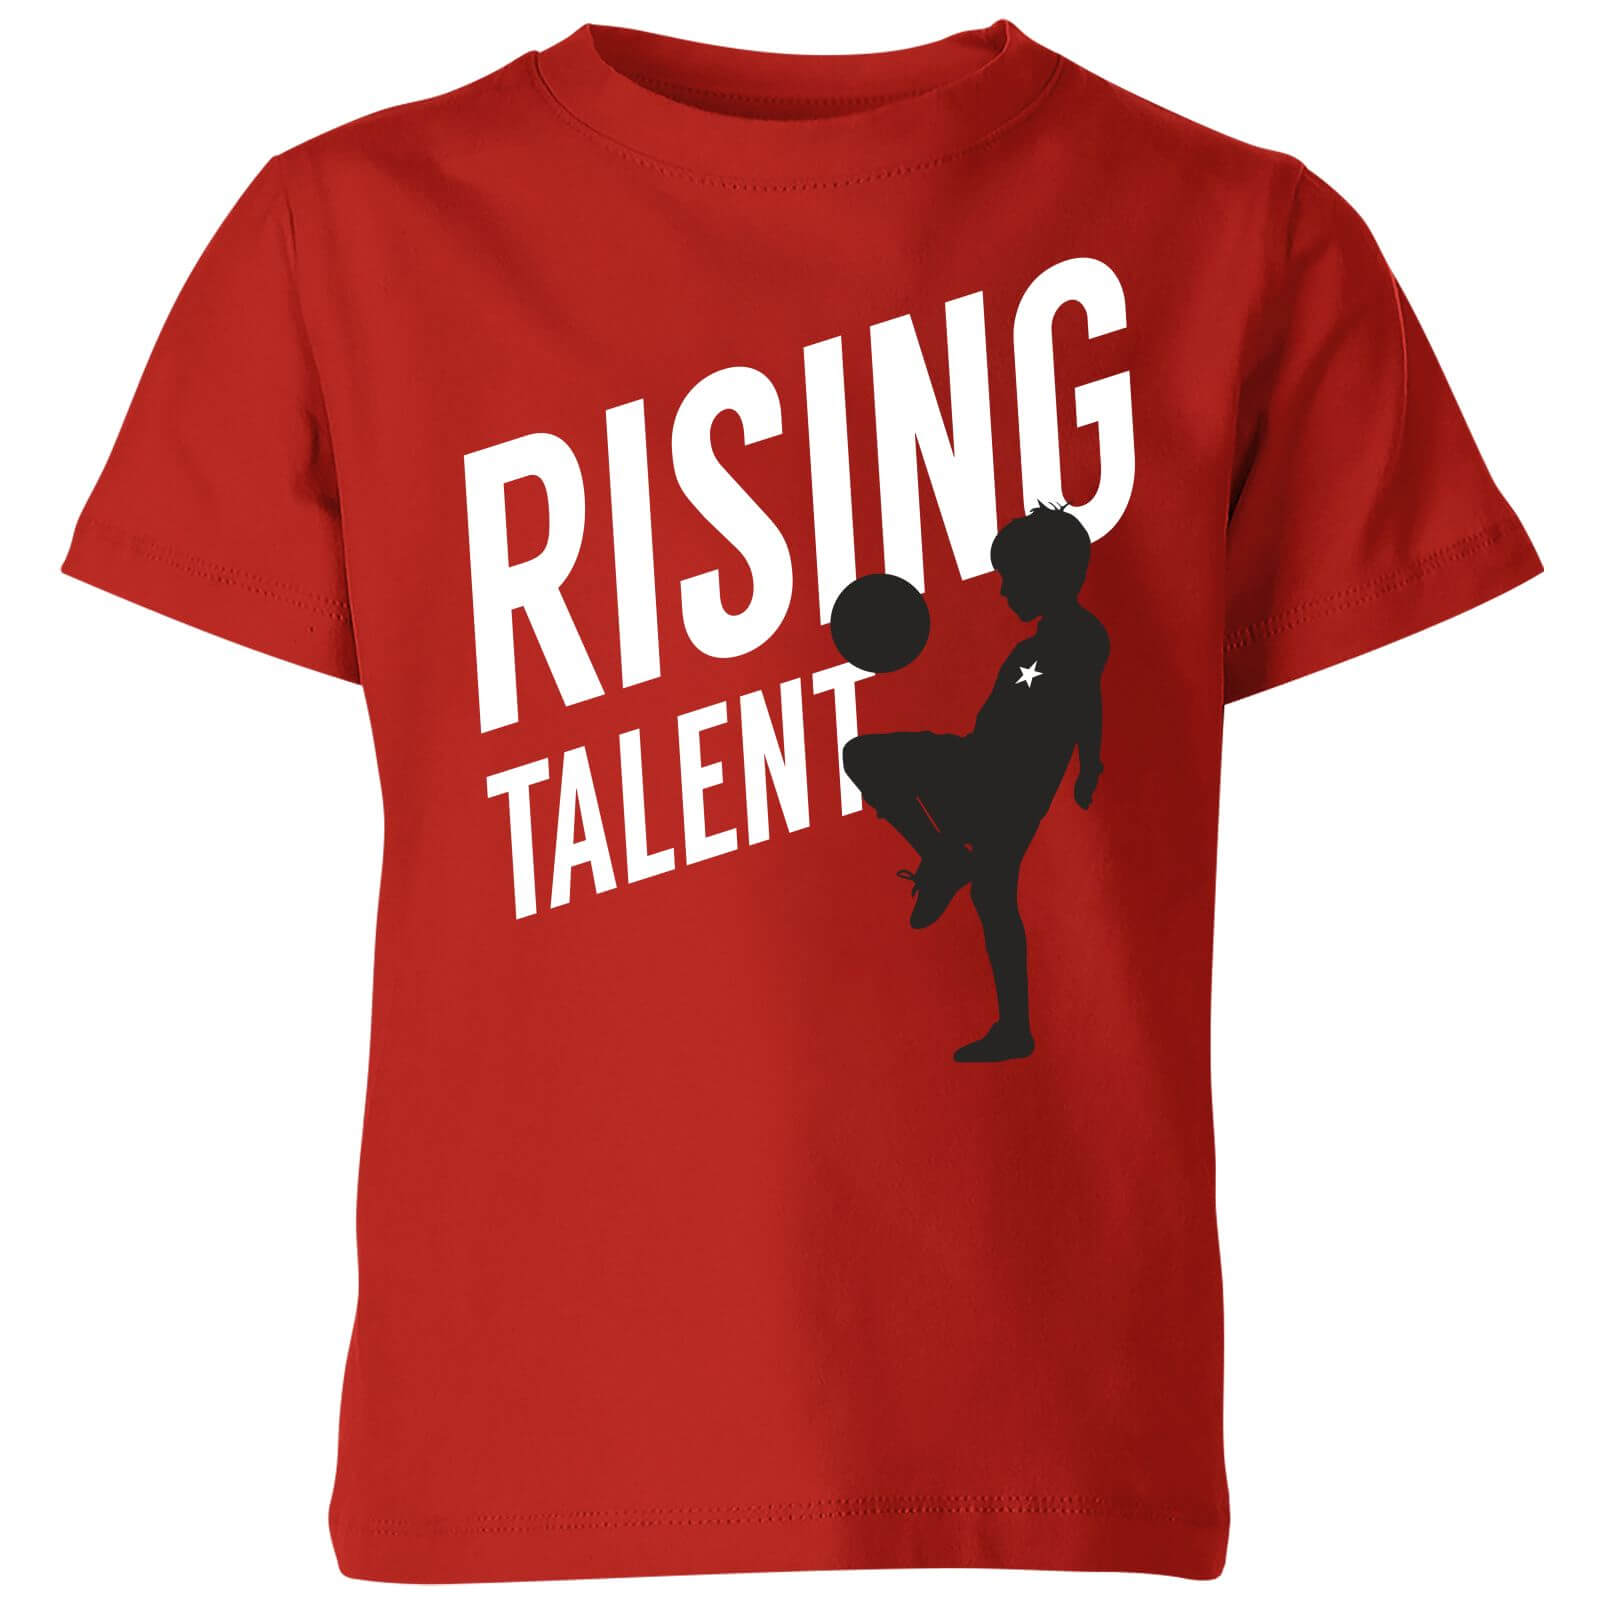 Rising Talent Kids' T-Shirt - Red - 3-4 Years - Red